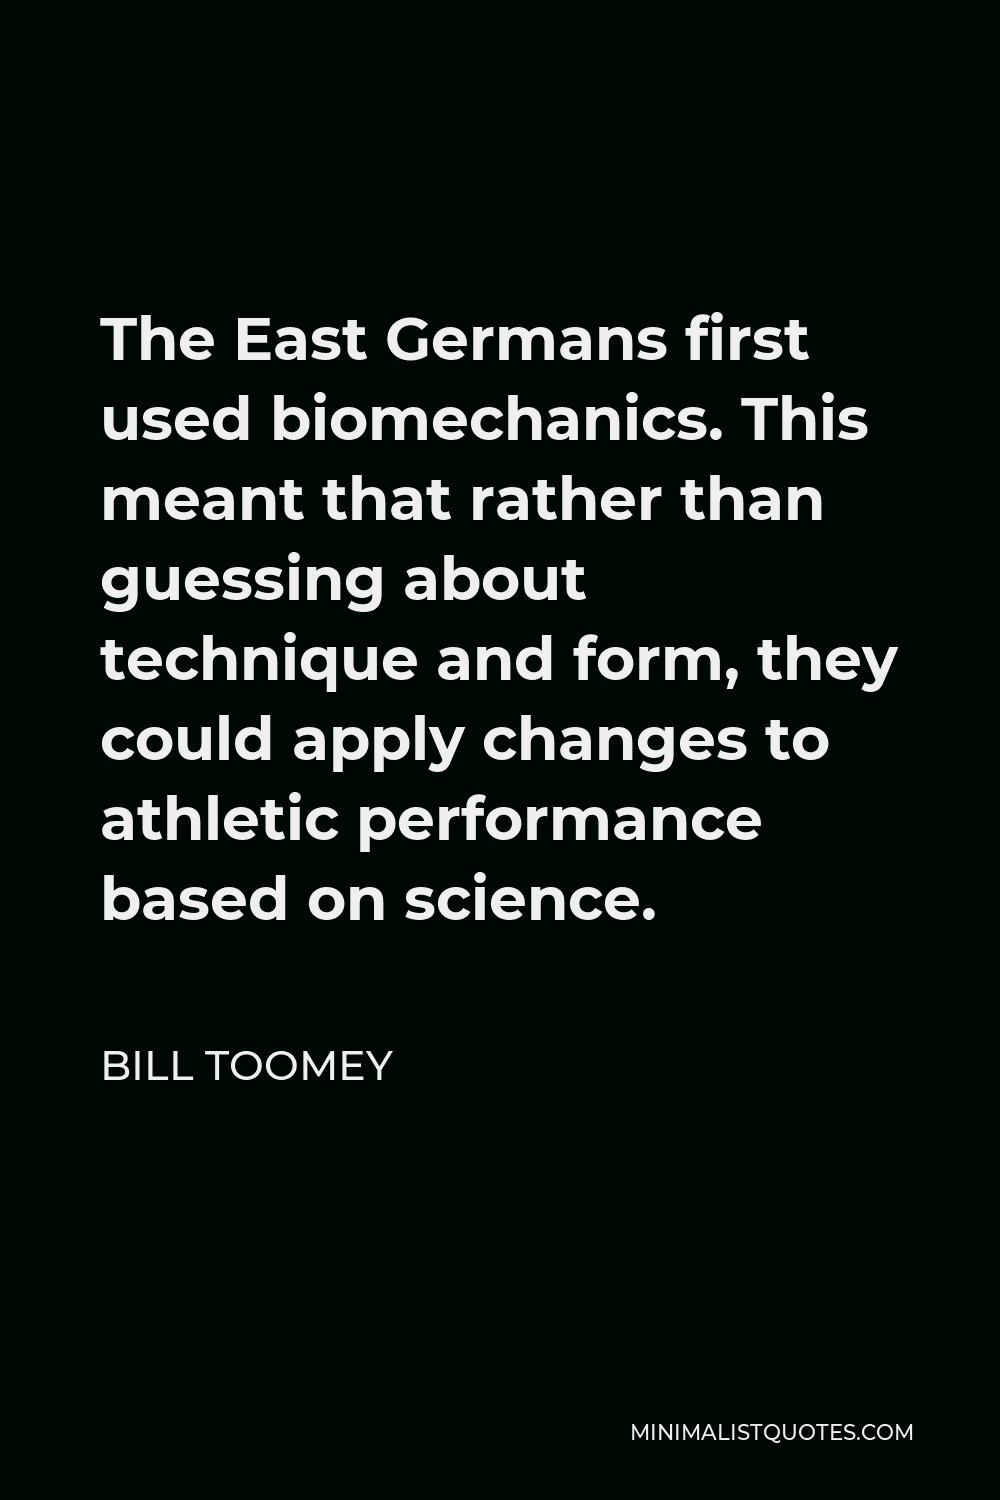 Bill Toomey Quote - The East Germans first used biomechanics. This meant that rather than guessing about technique and form, they could apply changes to athletic performance based on science.